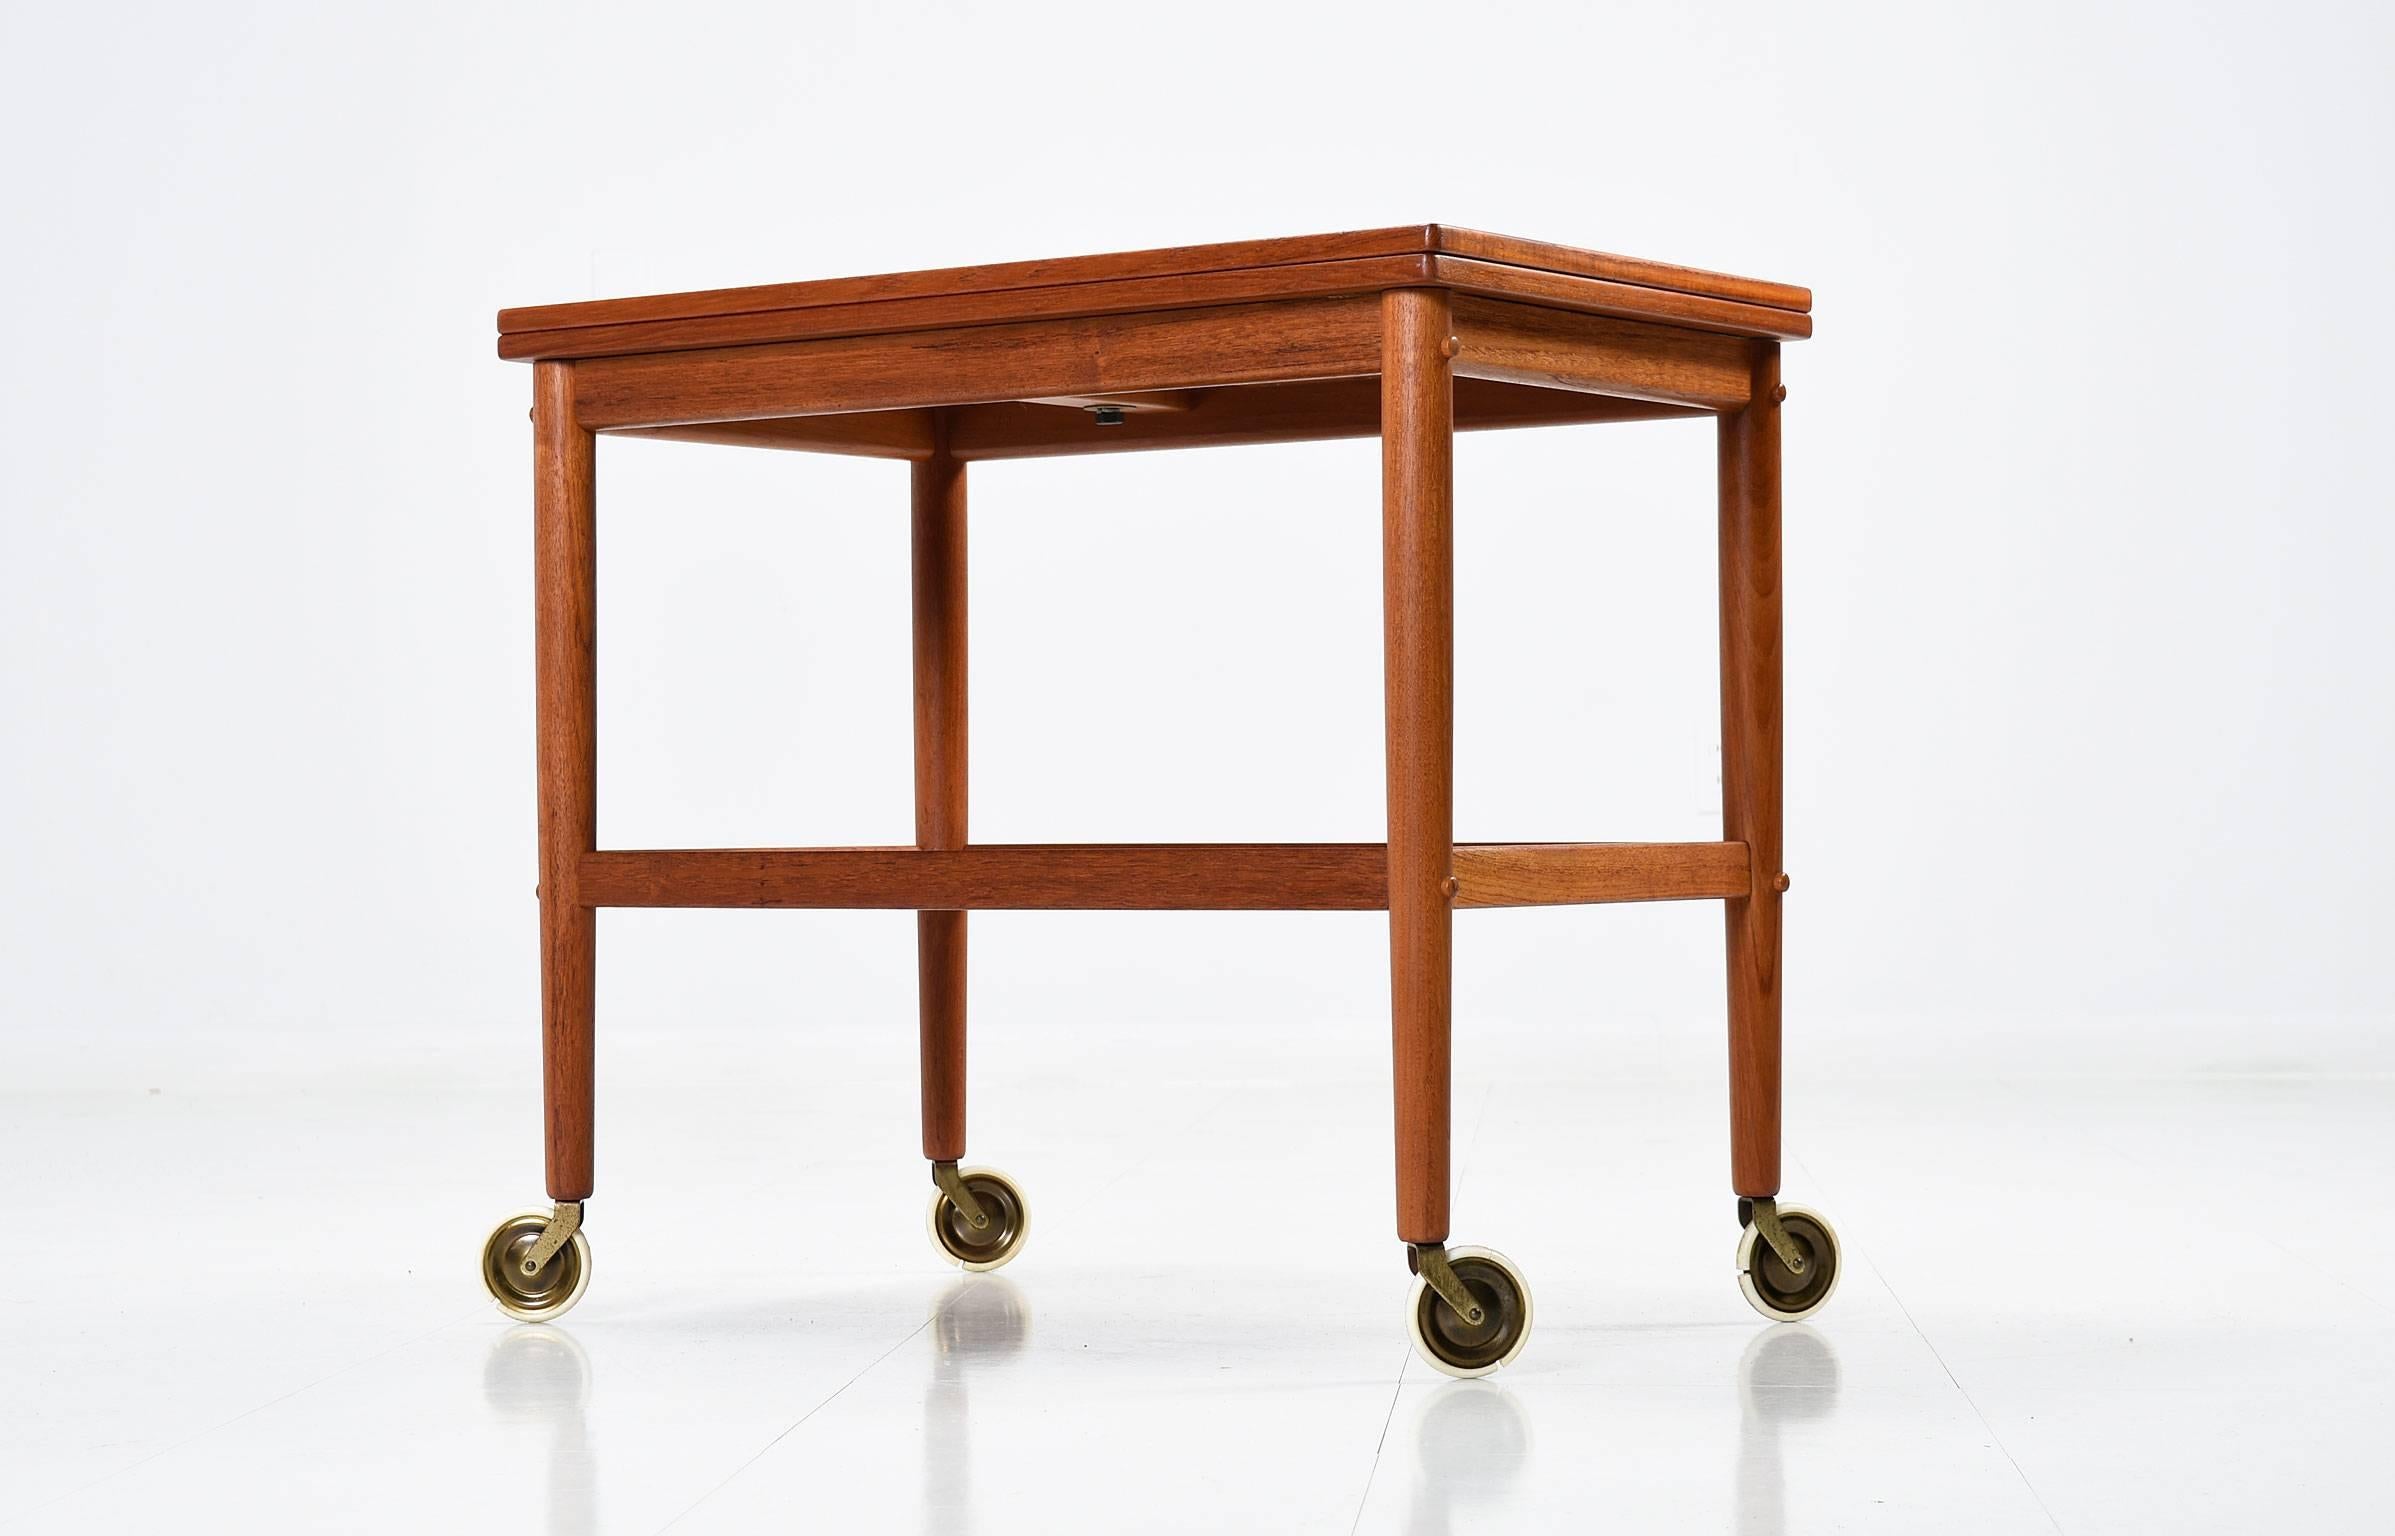 Mid-Century Modern Grete Jalk for Poul Jeppesen tea cart or serving bar cart, made in Denmark 1950s. This stunning tea cart has a unique design feature, the top slides to one side, turns 90 degrees and expands to twice the size. This piece bears the